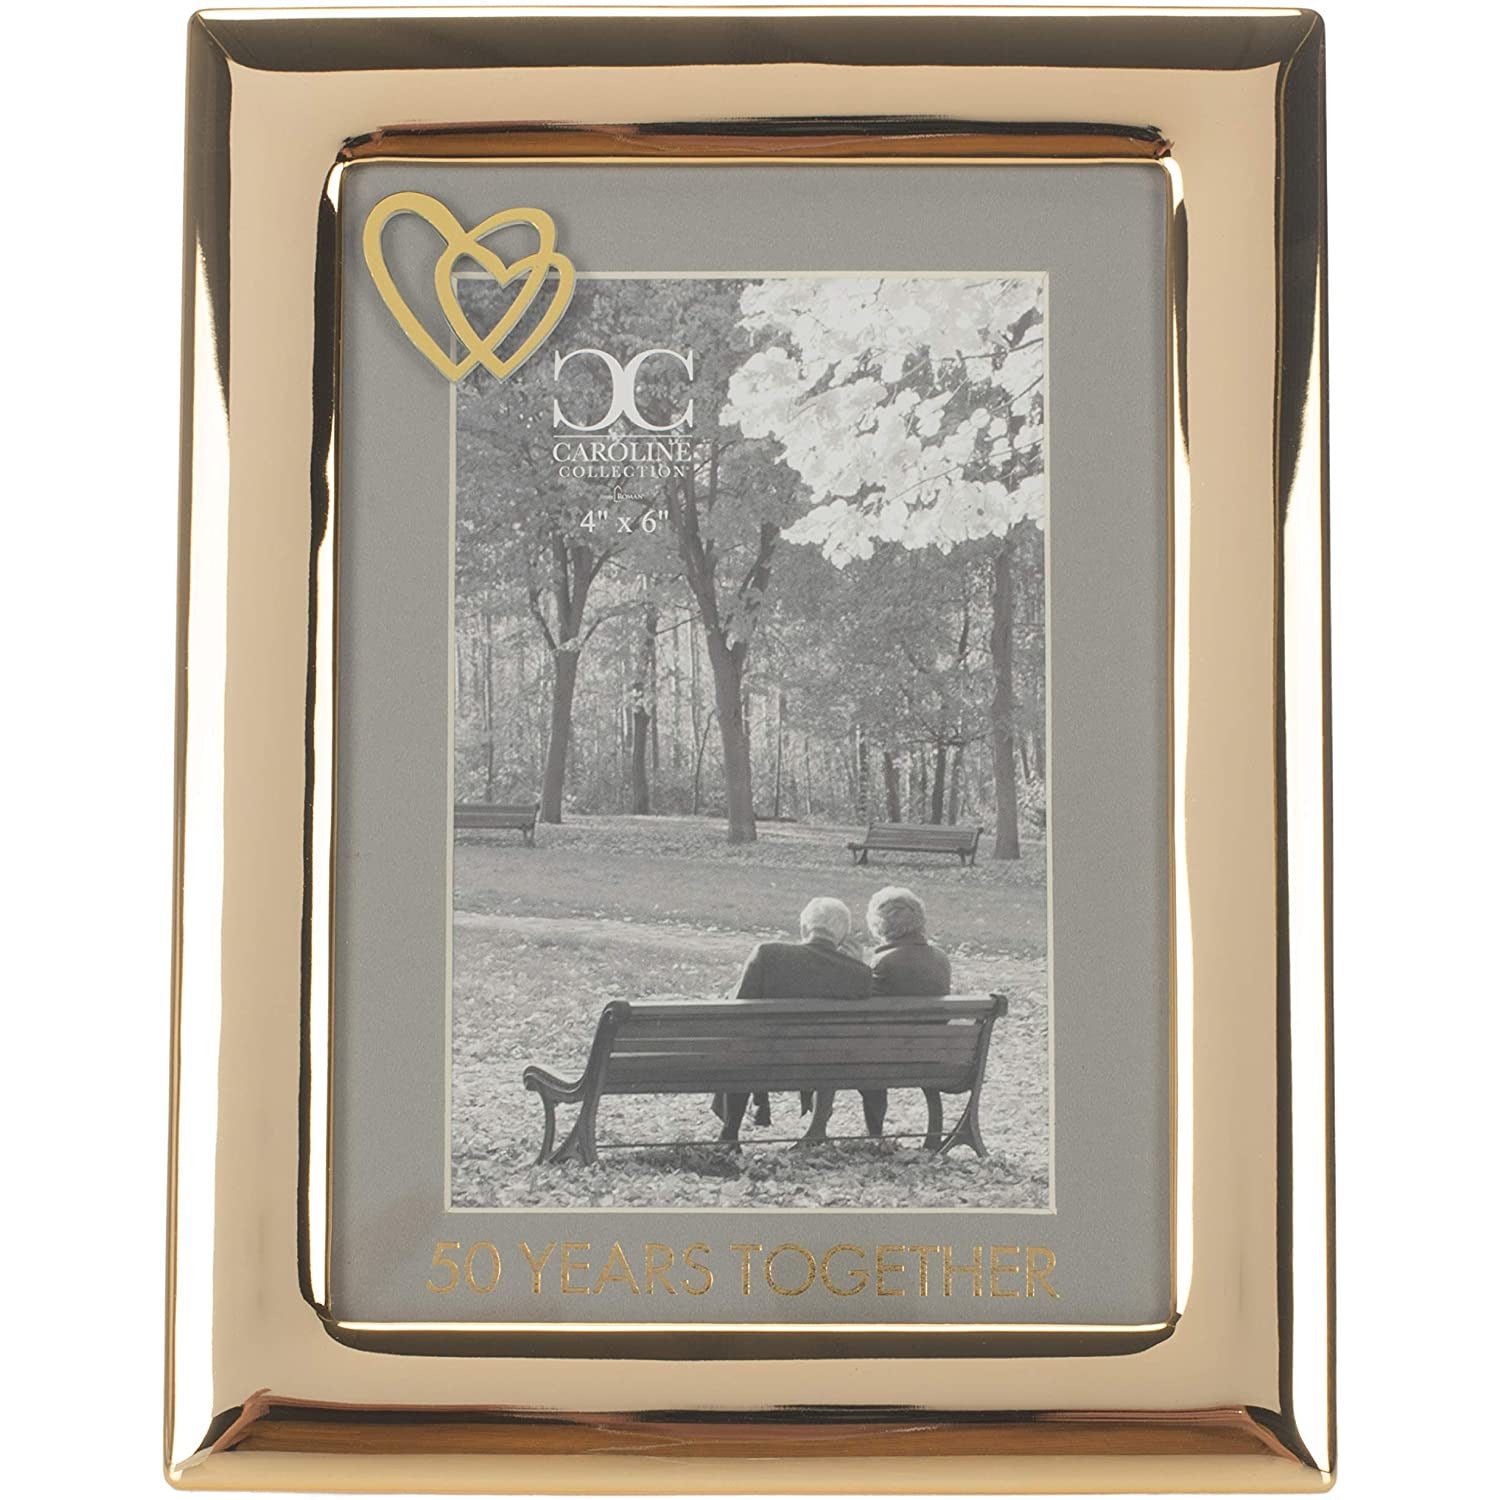 Roman 8-inch High 50 Years Together Picture Frame